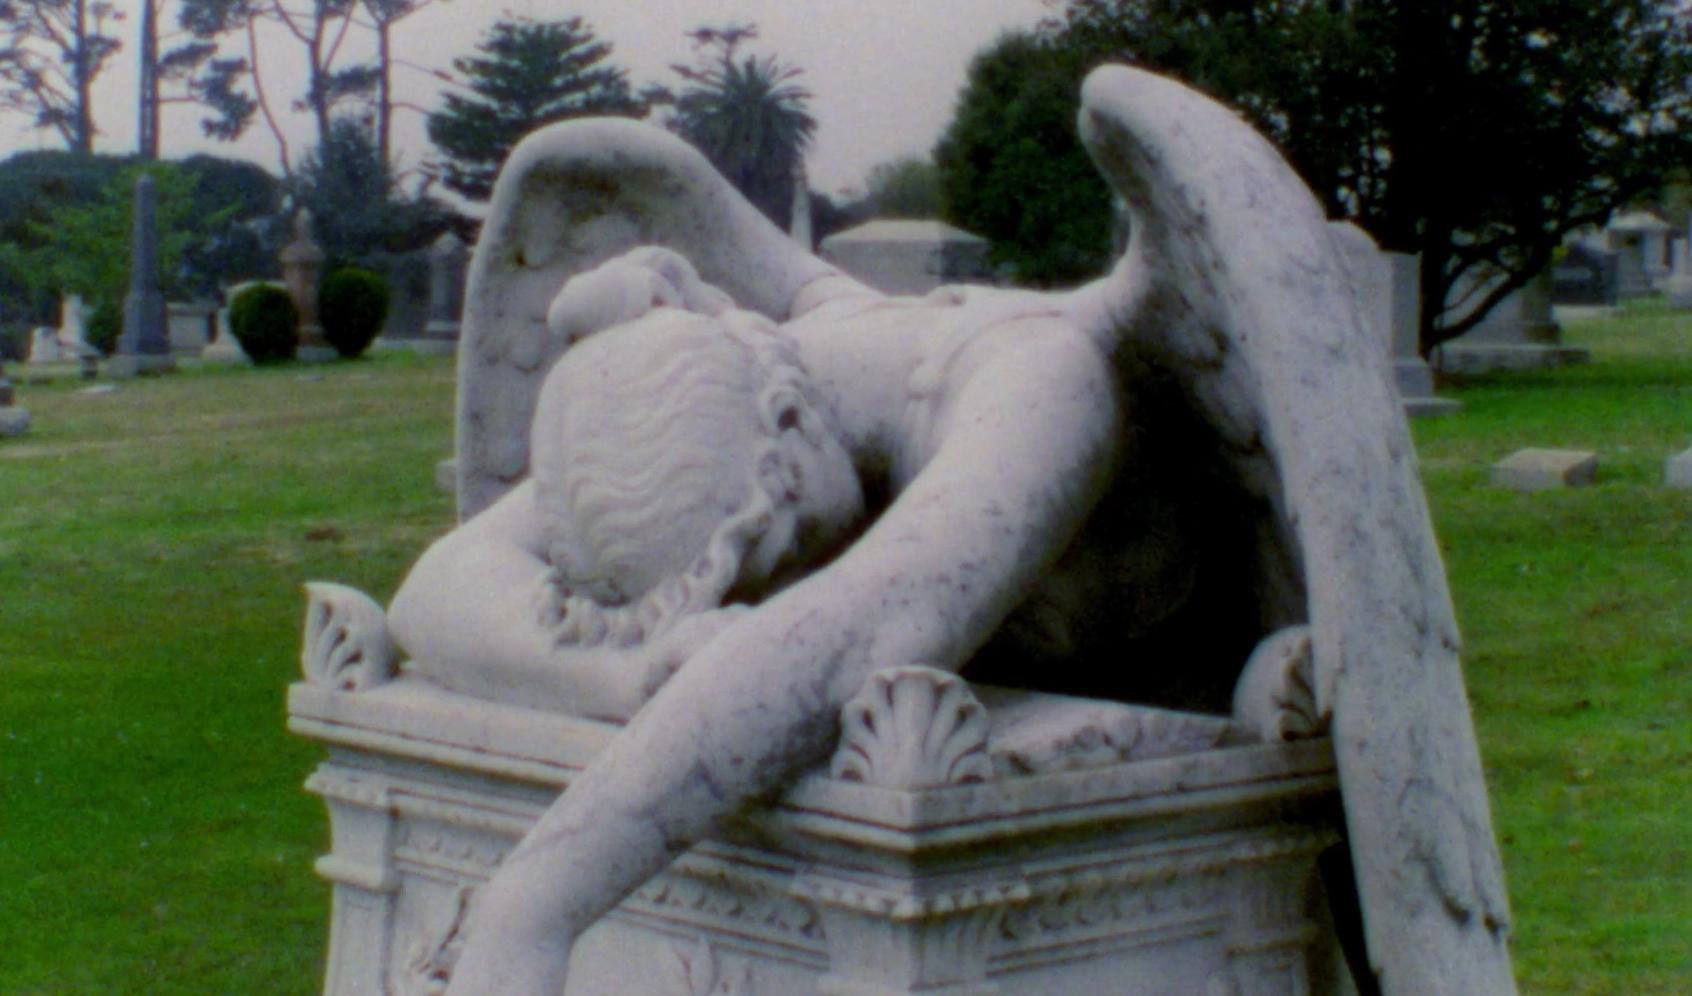 A weeping angel statue in Of the Dead (1979).